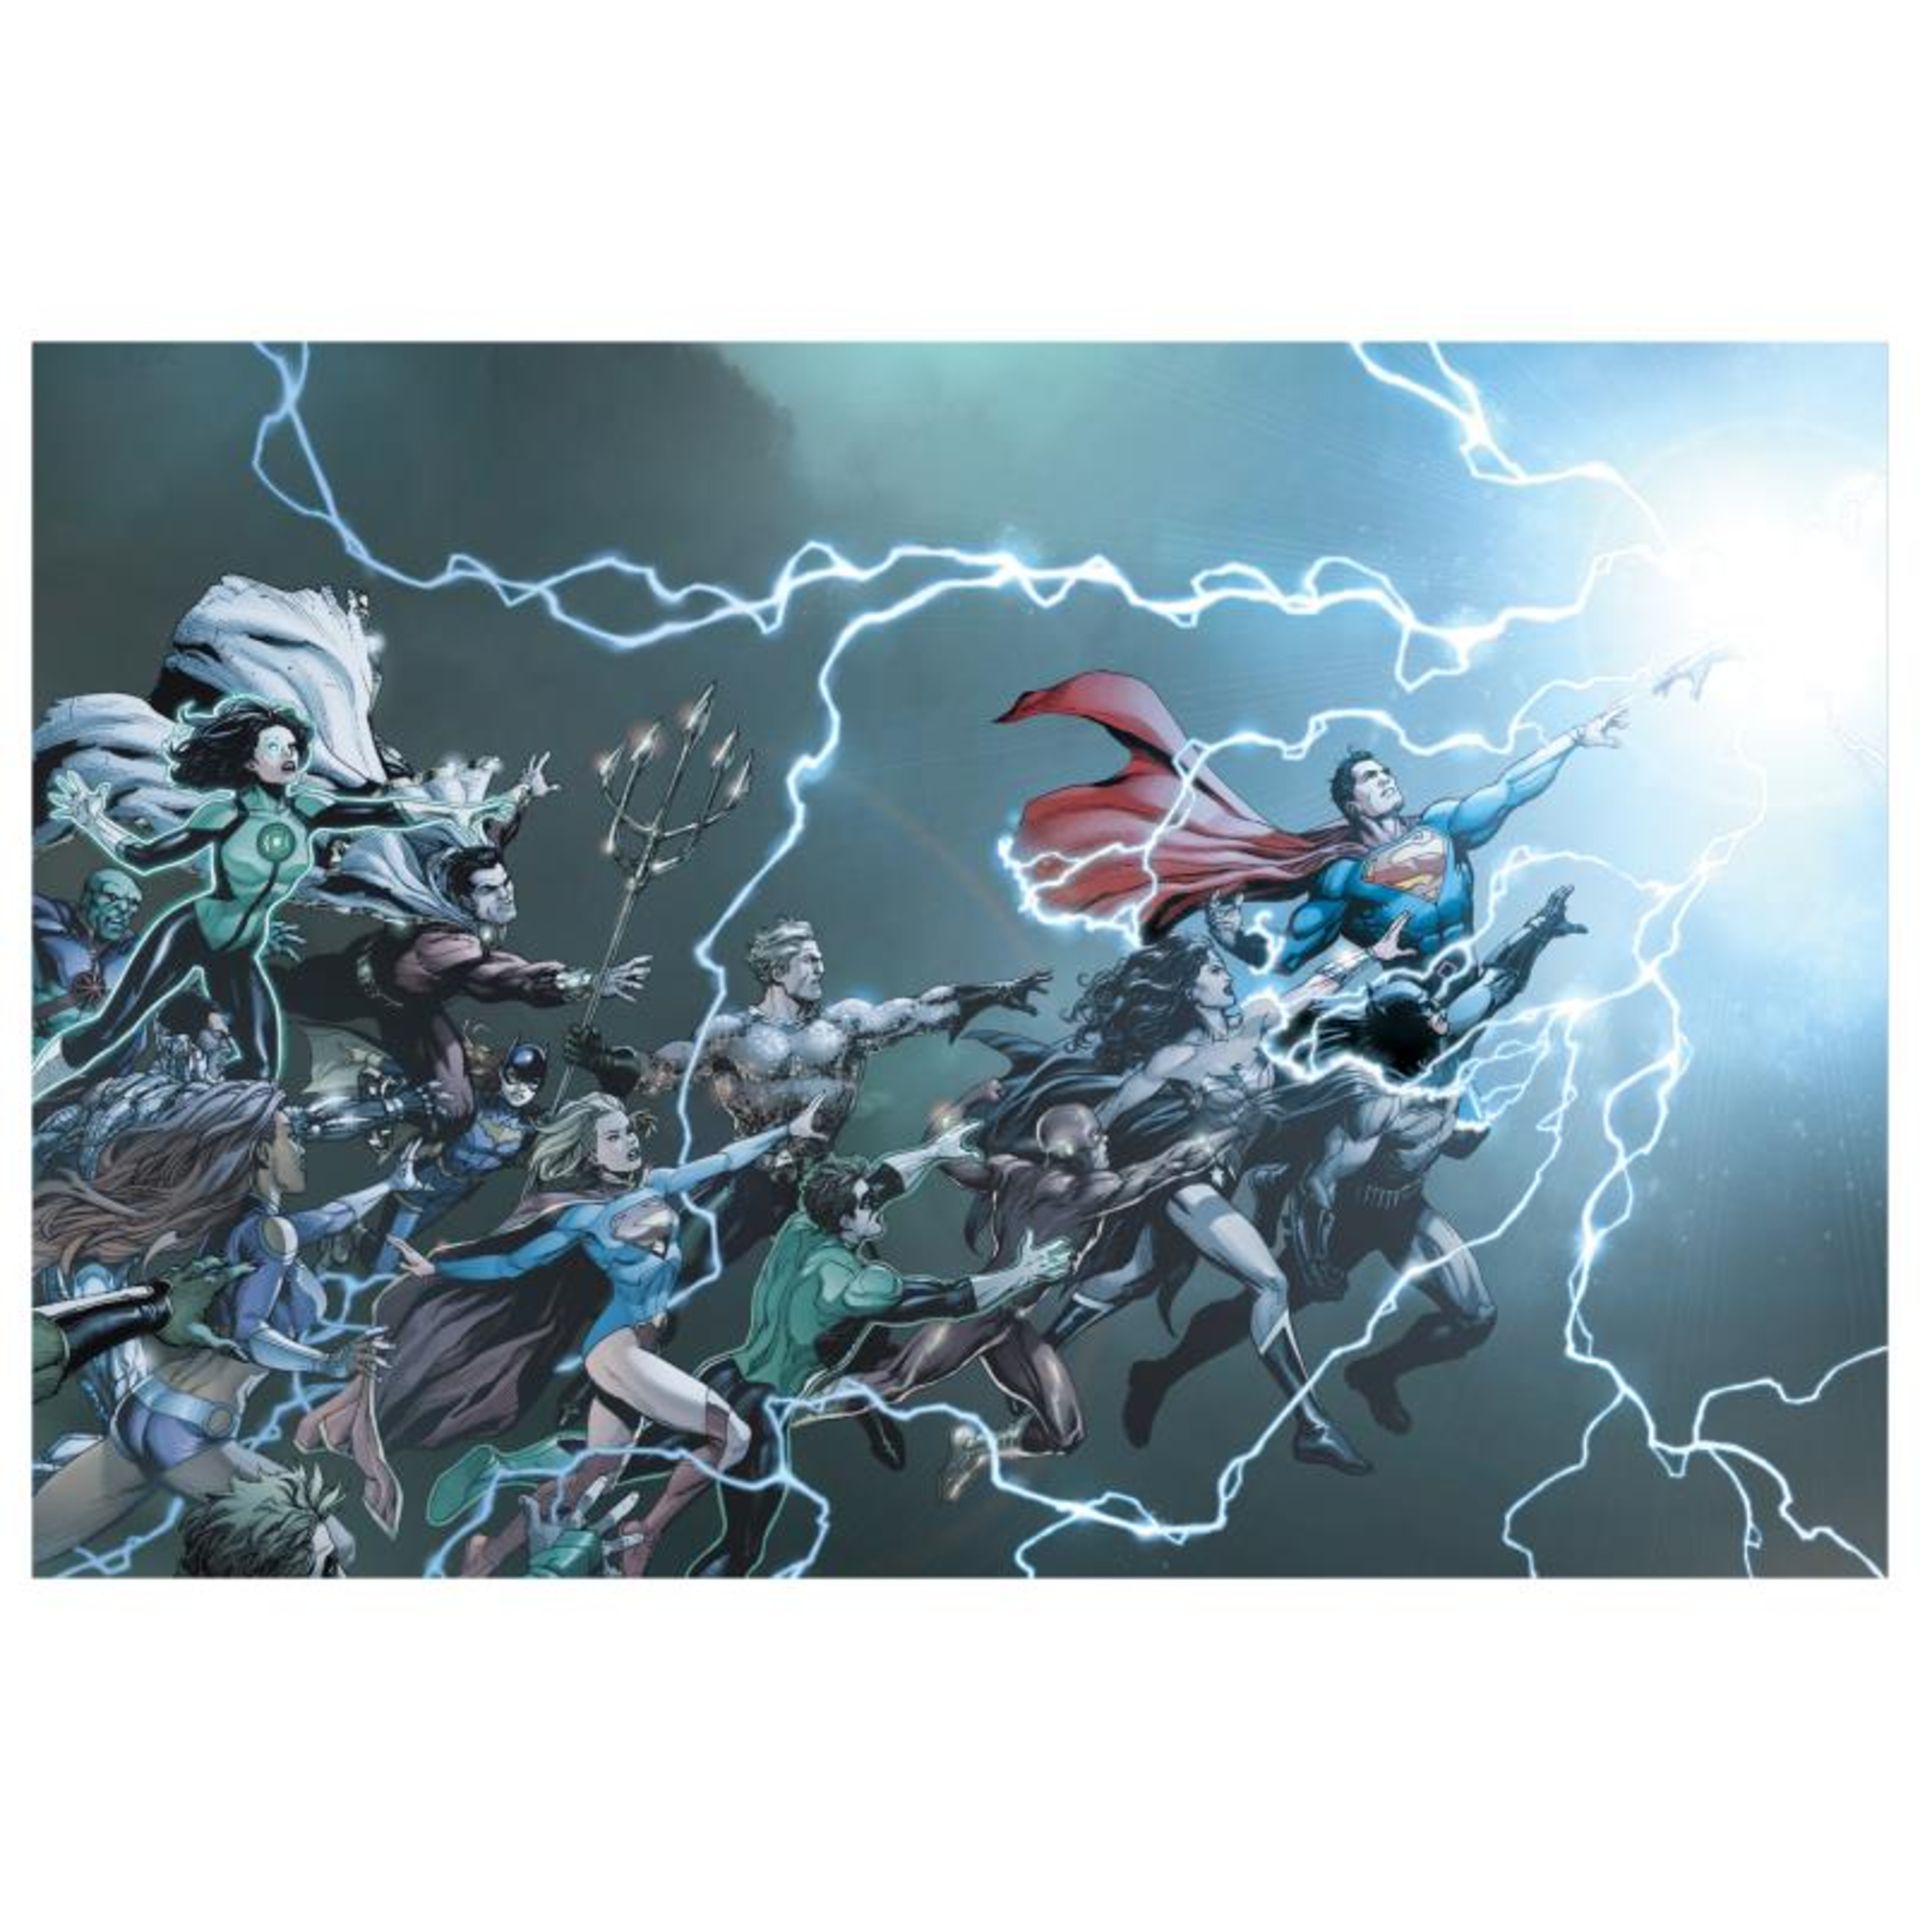 DC Comics, "DC Universe: Rebirth #1" Numbered Limited Edition Giclee on Canvas b